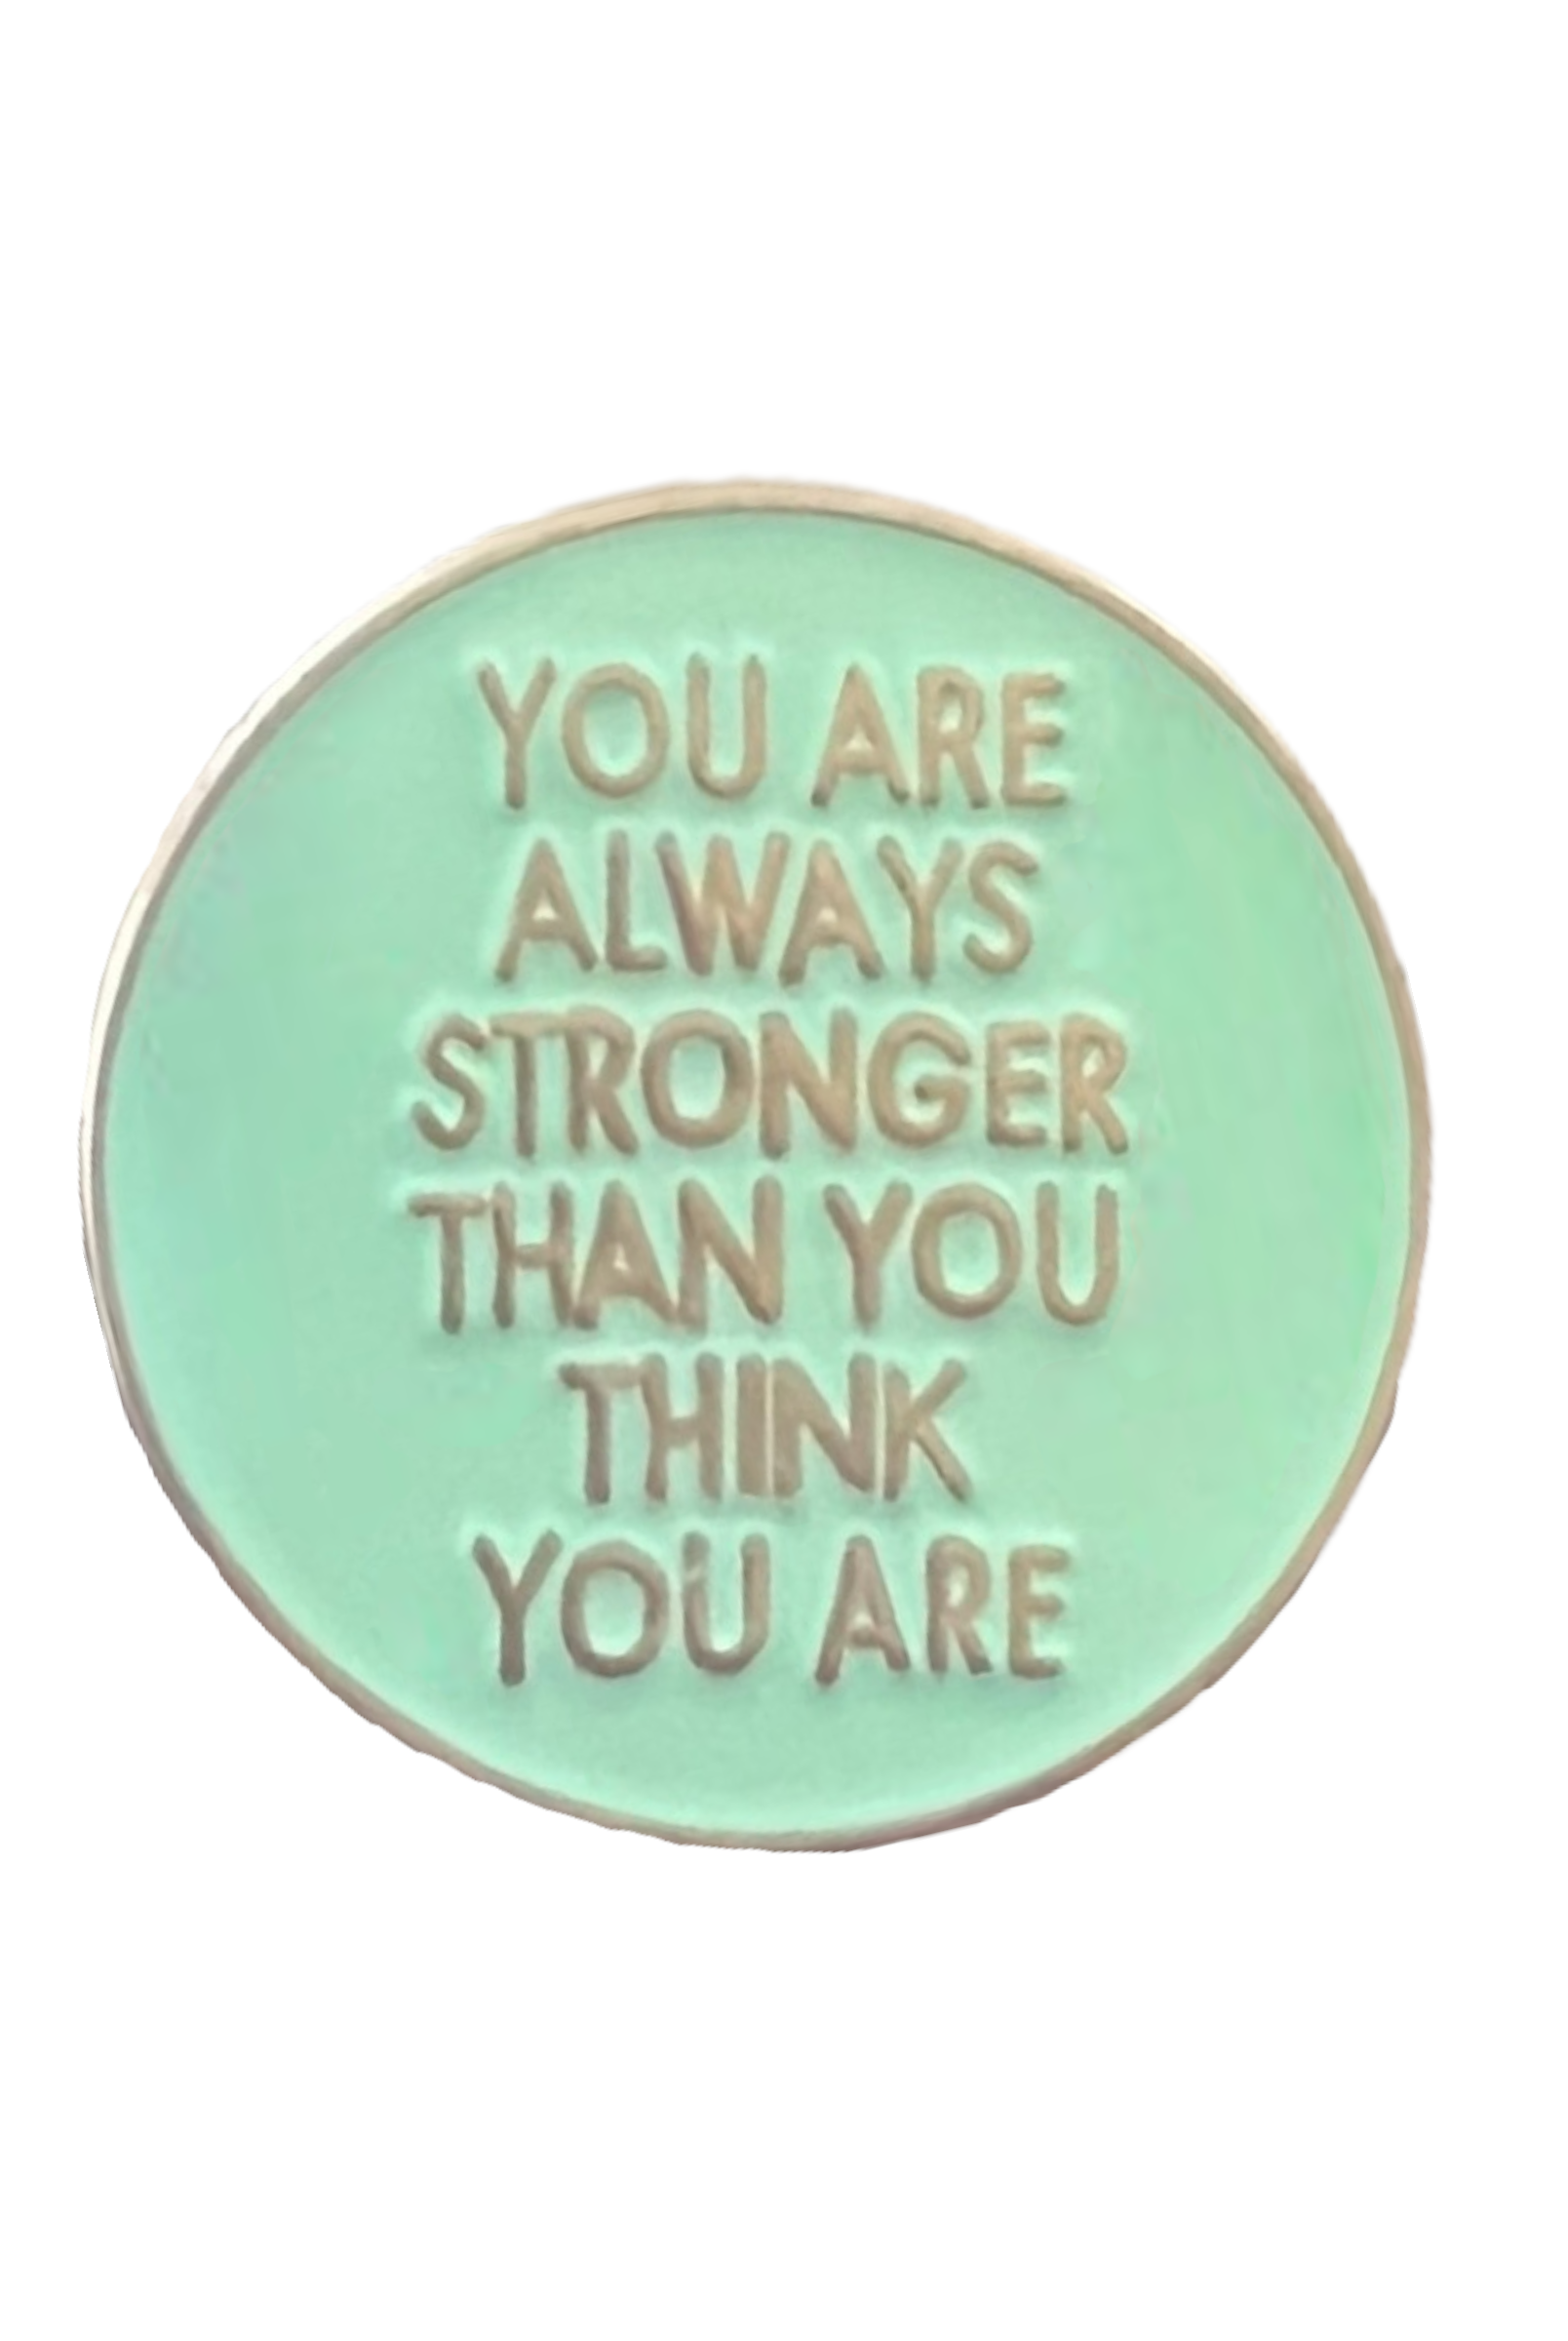 Pin — 'You Are Stronger Than You Think'  SPIRIT SPARKPLUGS You Are Stronger Than You Think Aqua 